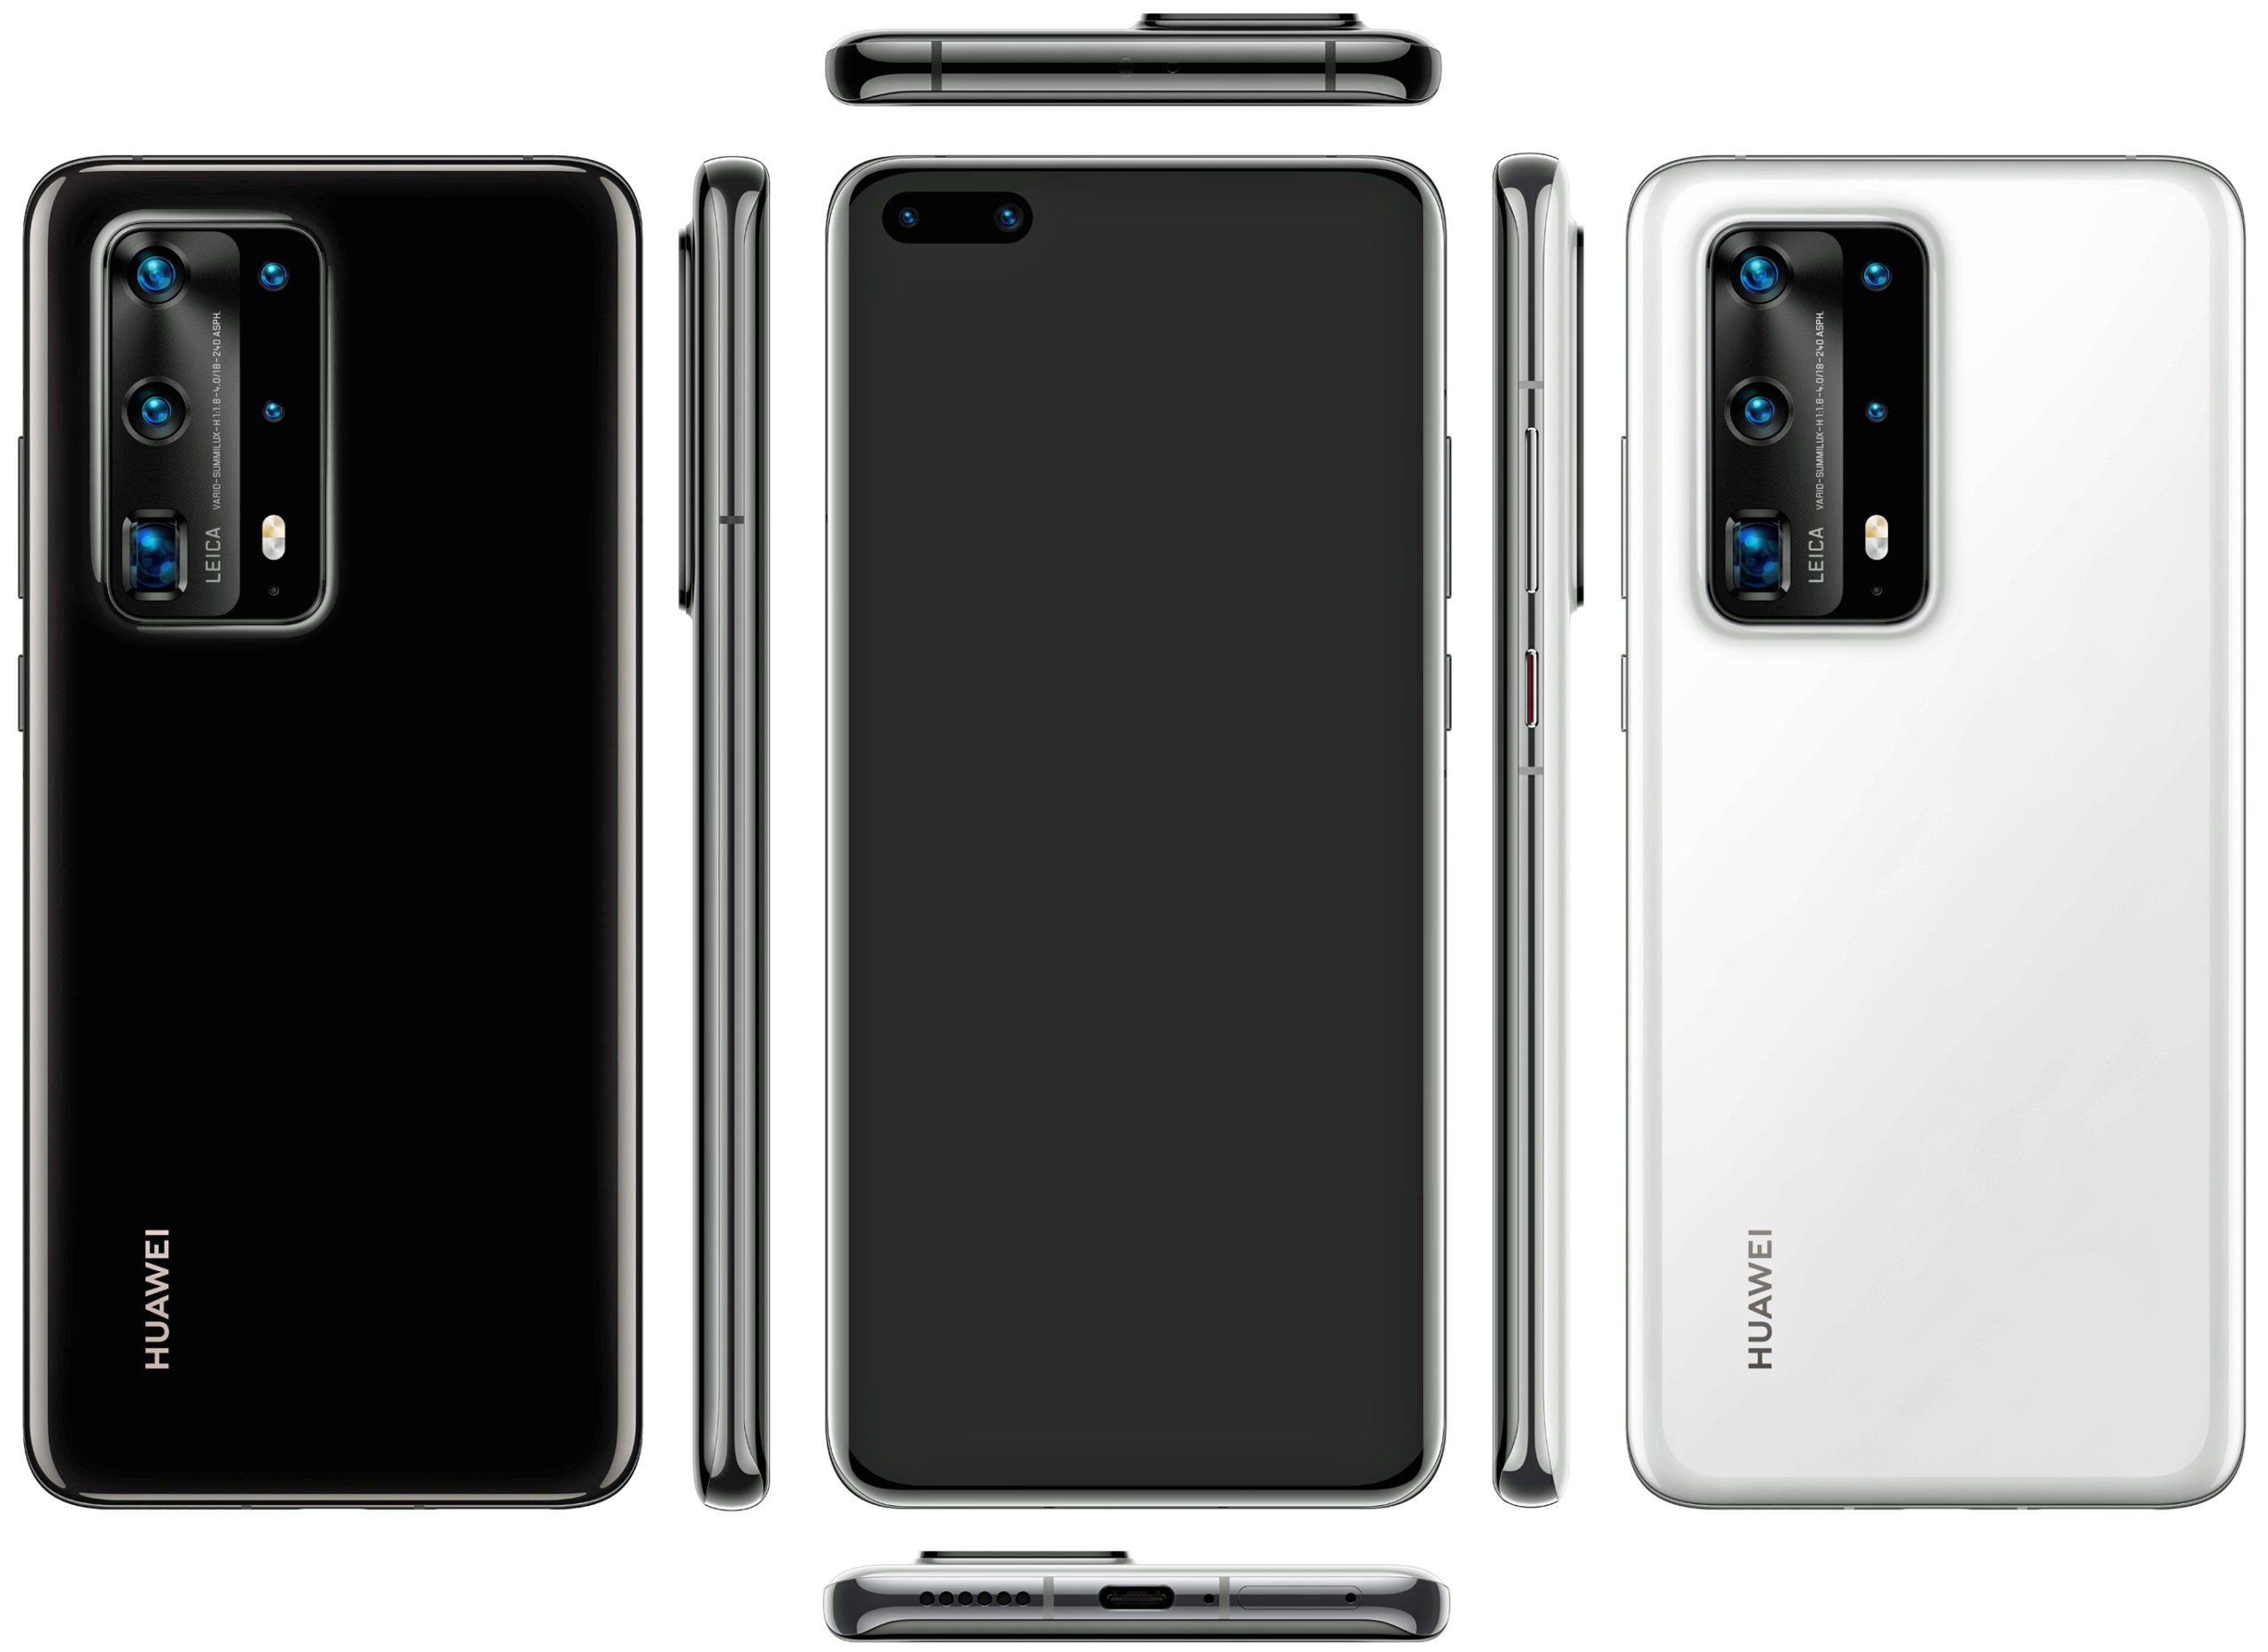 Overview of the smartphone Huawei P40 Pro Premium with key features